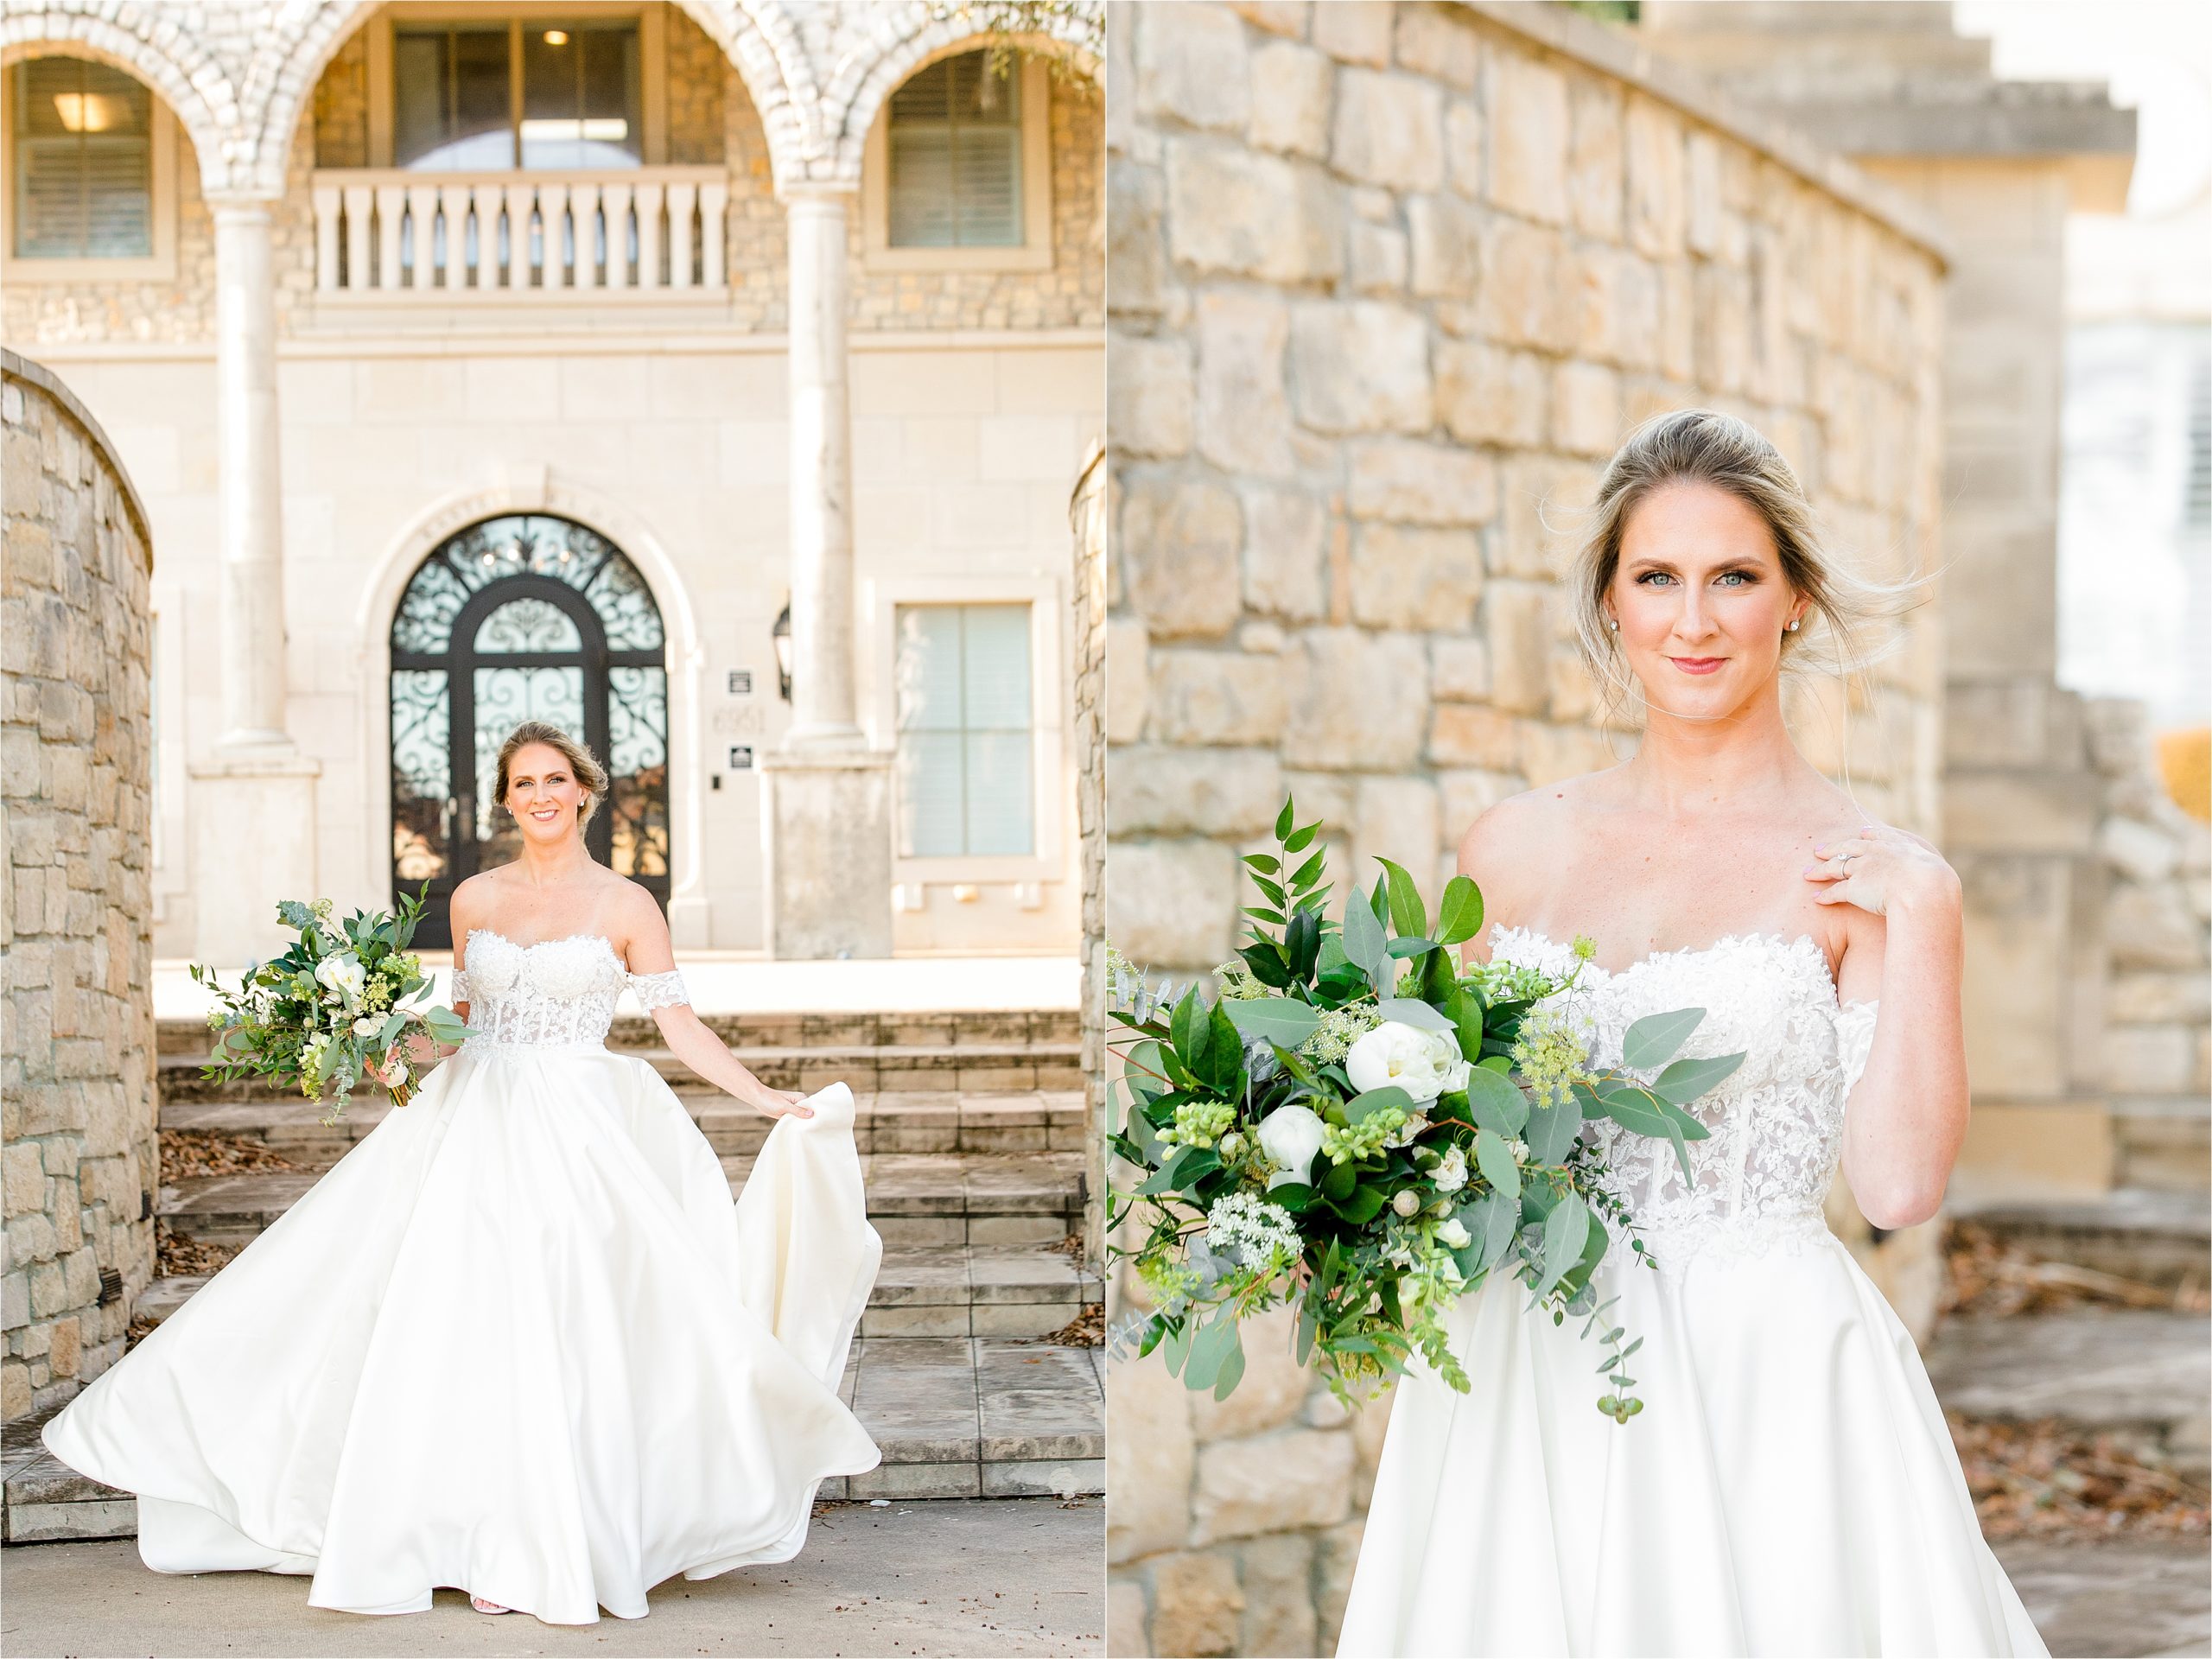 Soft smiles, greenery bouquet and a beautiful off the shoulder wedding dress for Hannahs winter bridal portraits at adriatica village in McKinney, Texas 